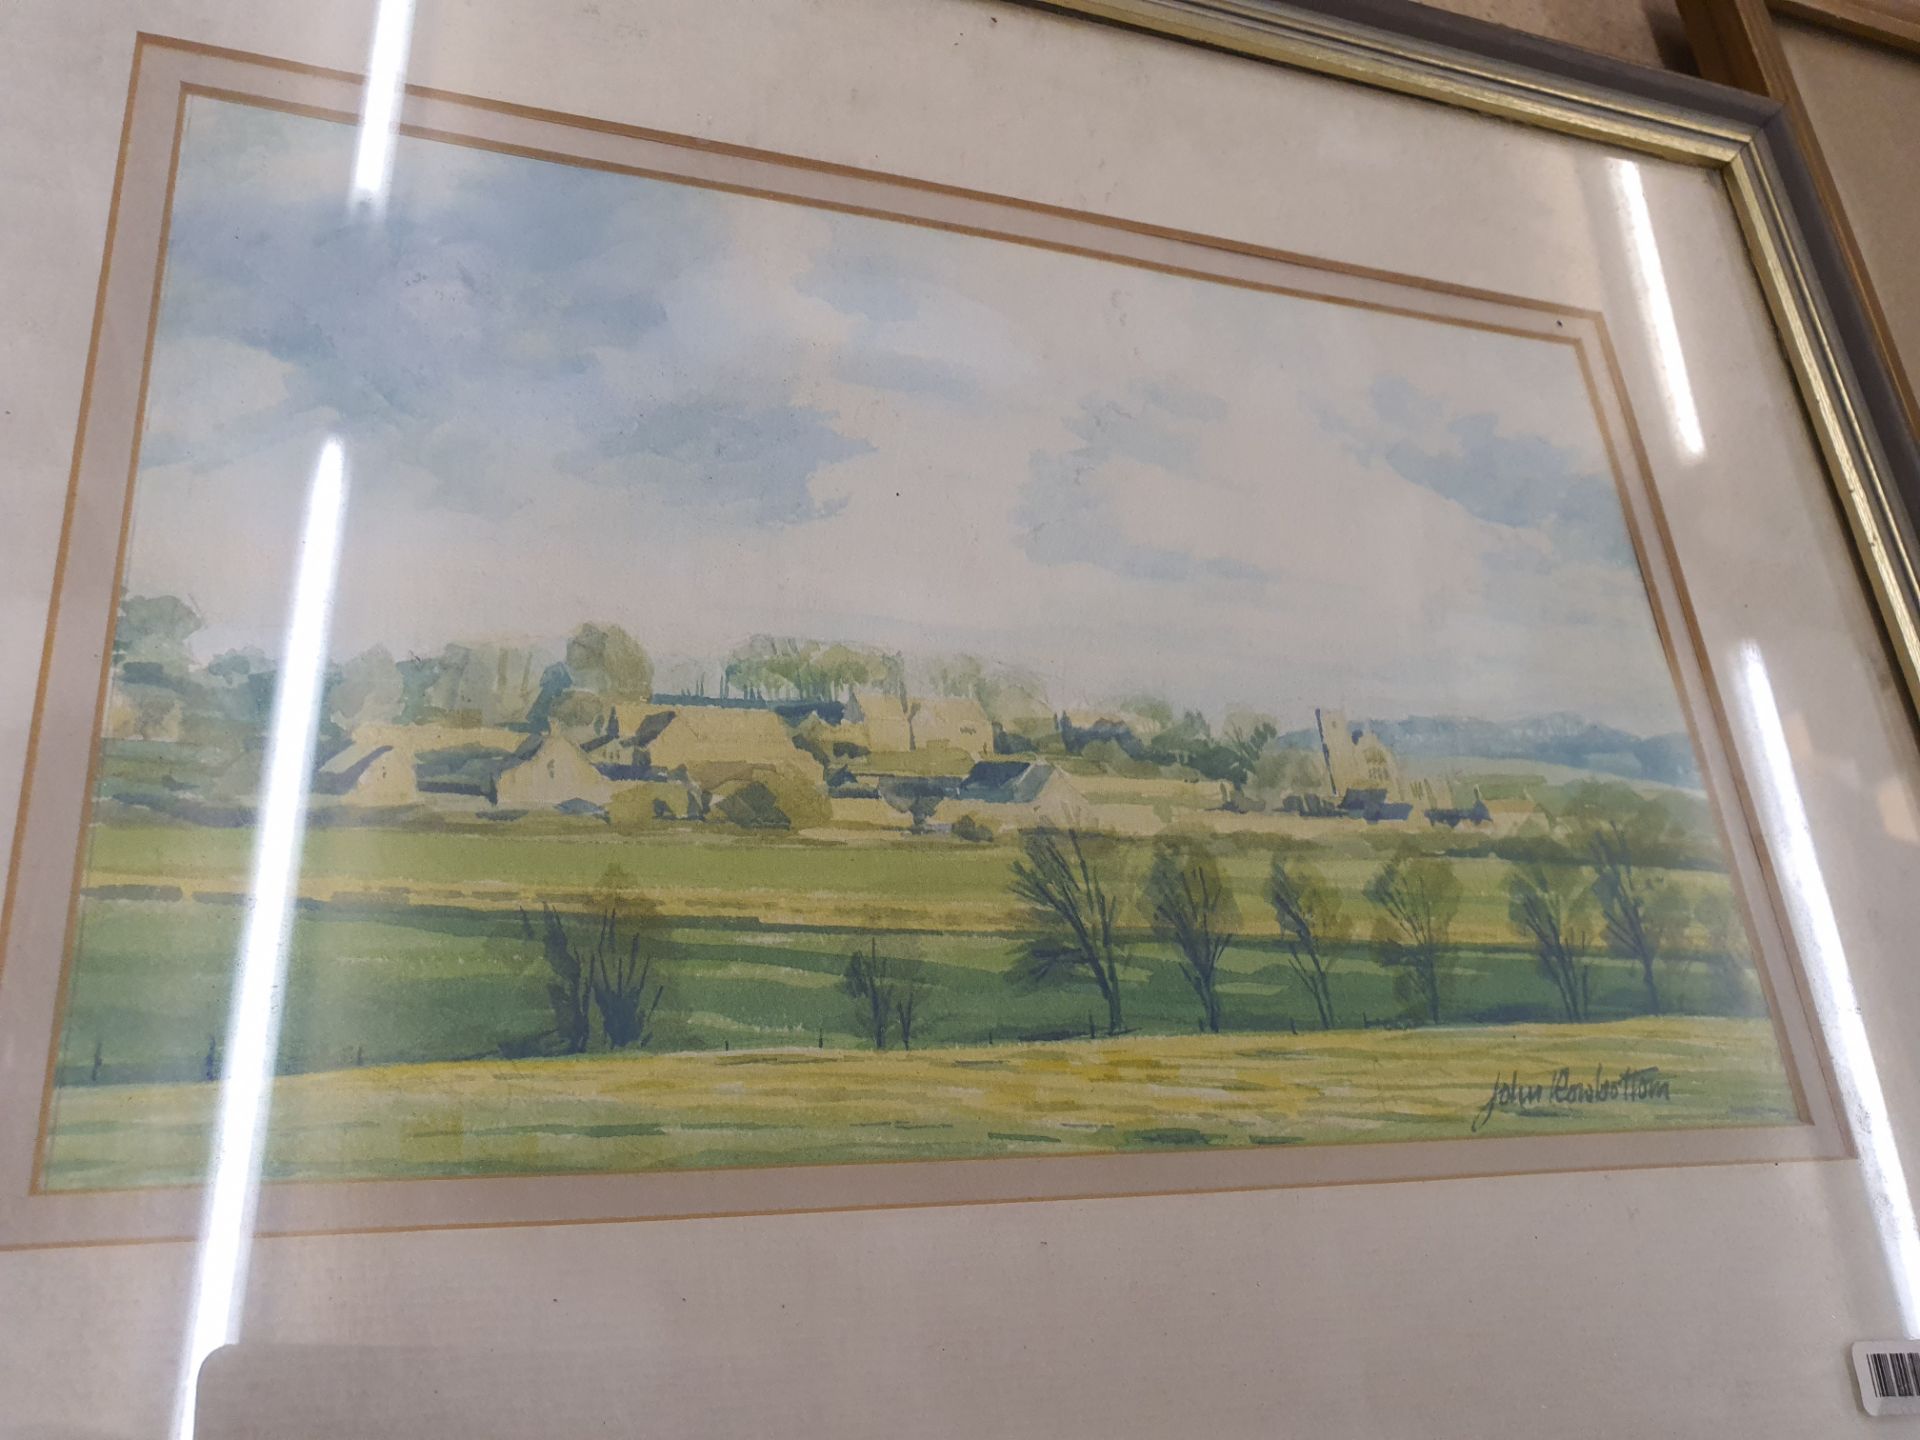 No VAT Grade U Two Gilt Framed Prints - One Of Countyside Scene And One Canal Scene - Image 4 of 4